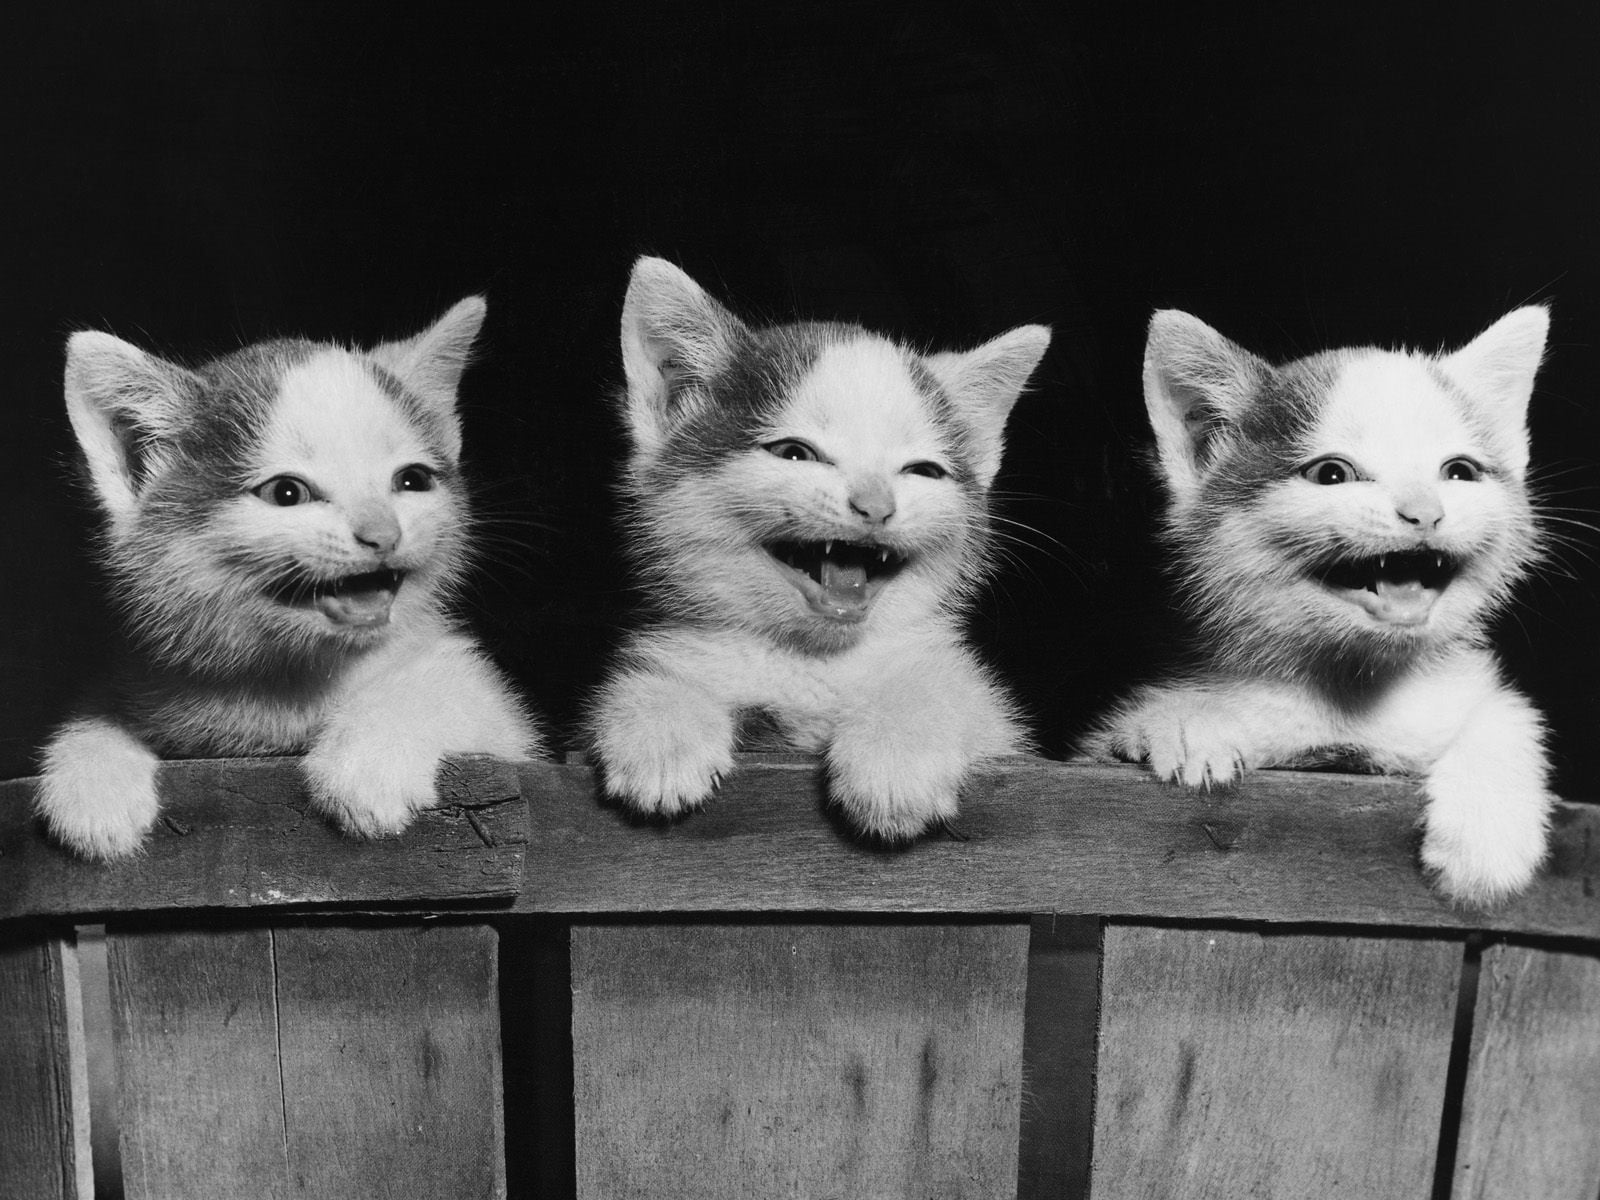 three long-fur kittens on wooden fence